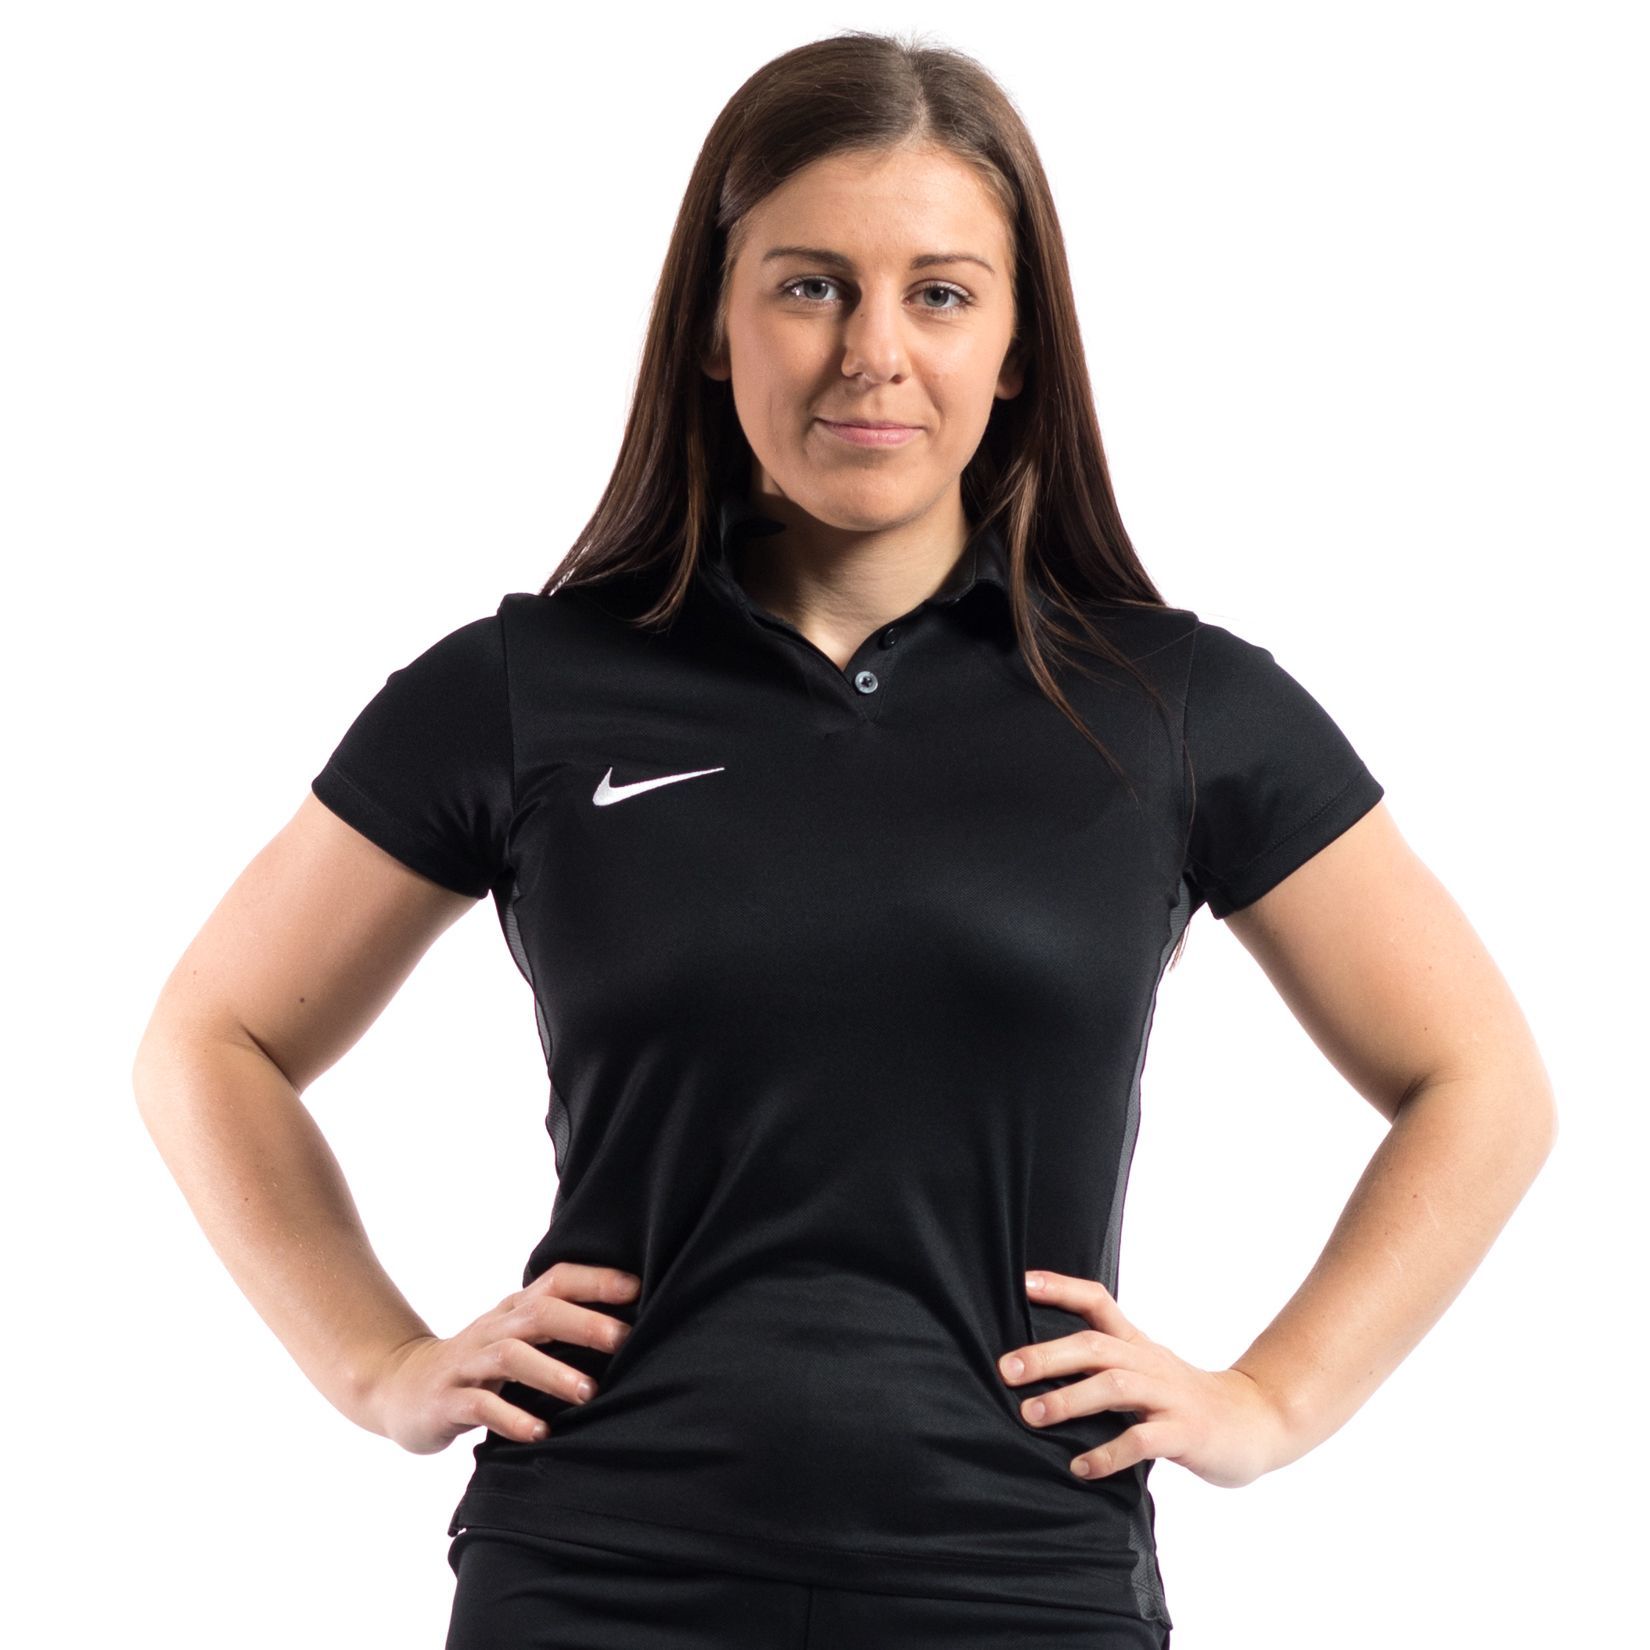 Nike Academy Polo Top Sellers, 58% OFF | mixerreviews.co.uk